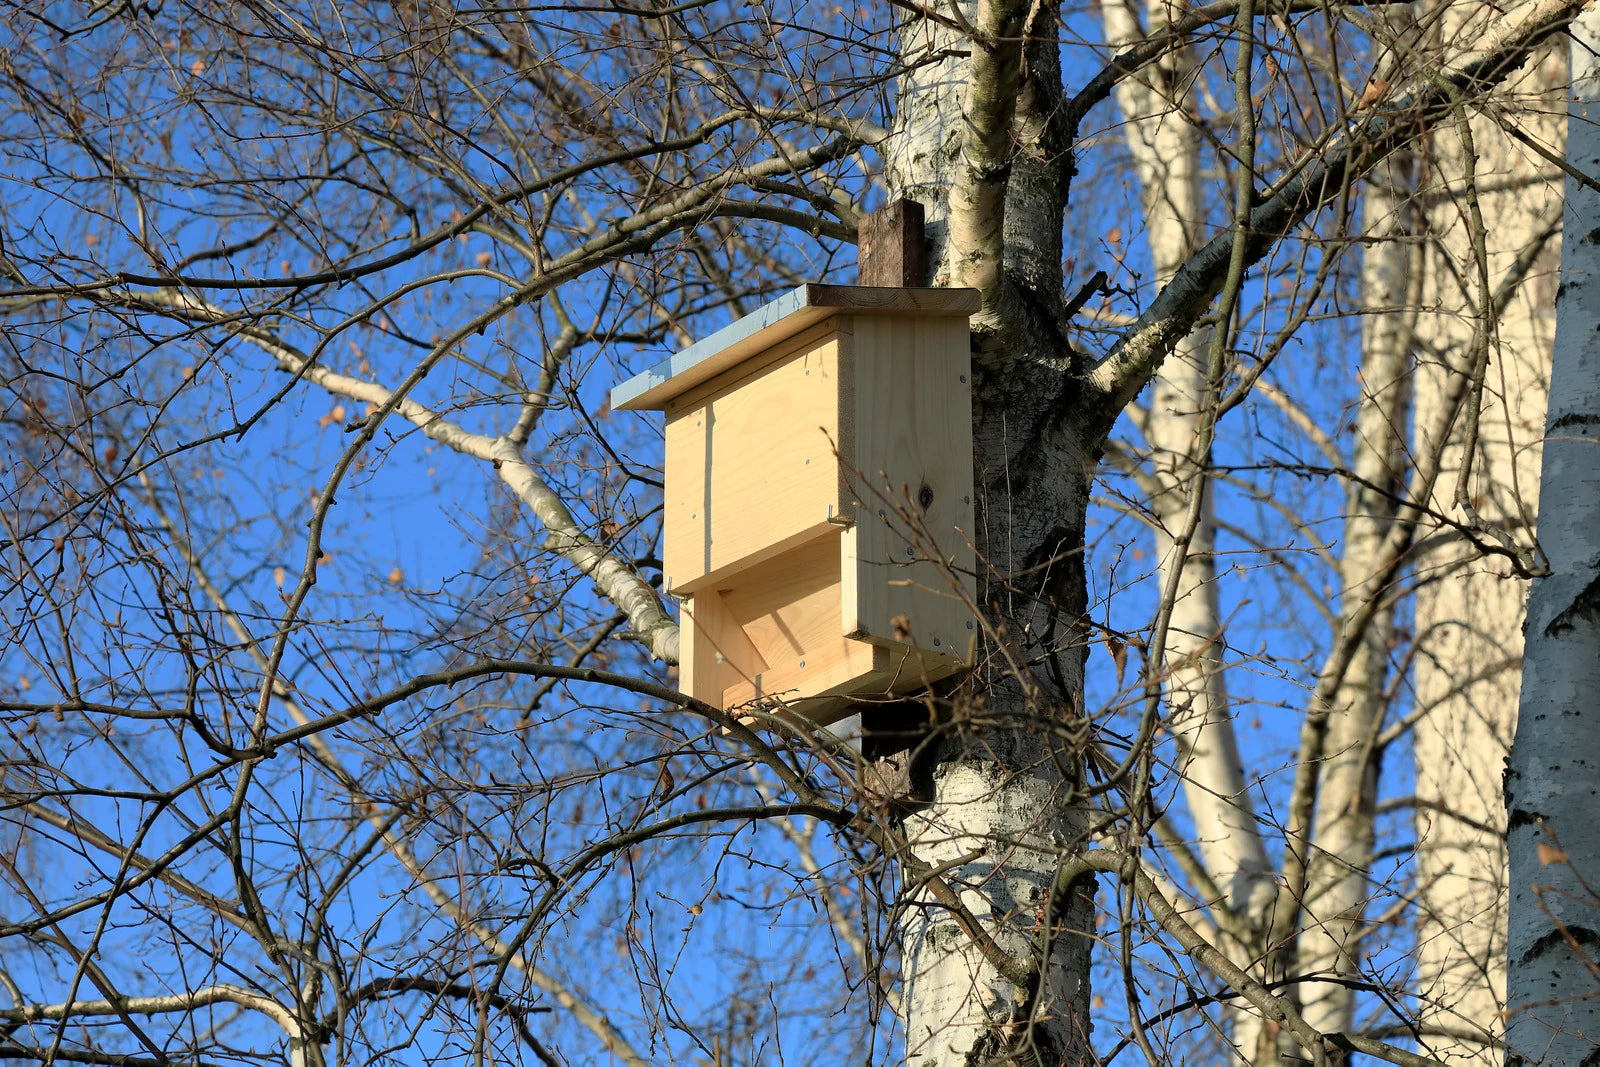 The Essential Role of Bat Houses in Enhancing Survival Gardens